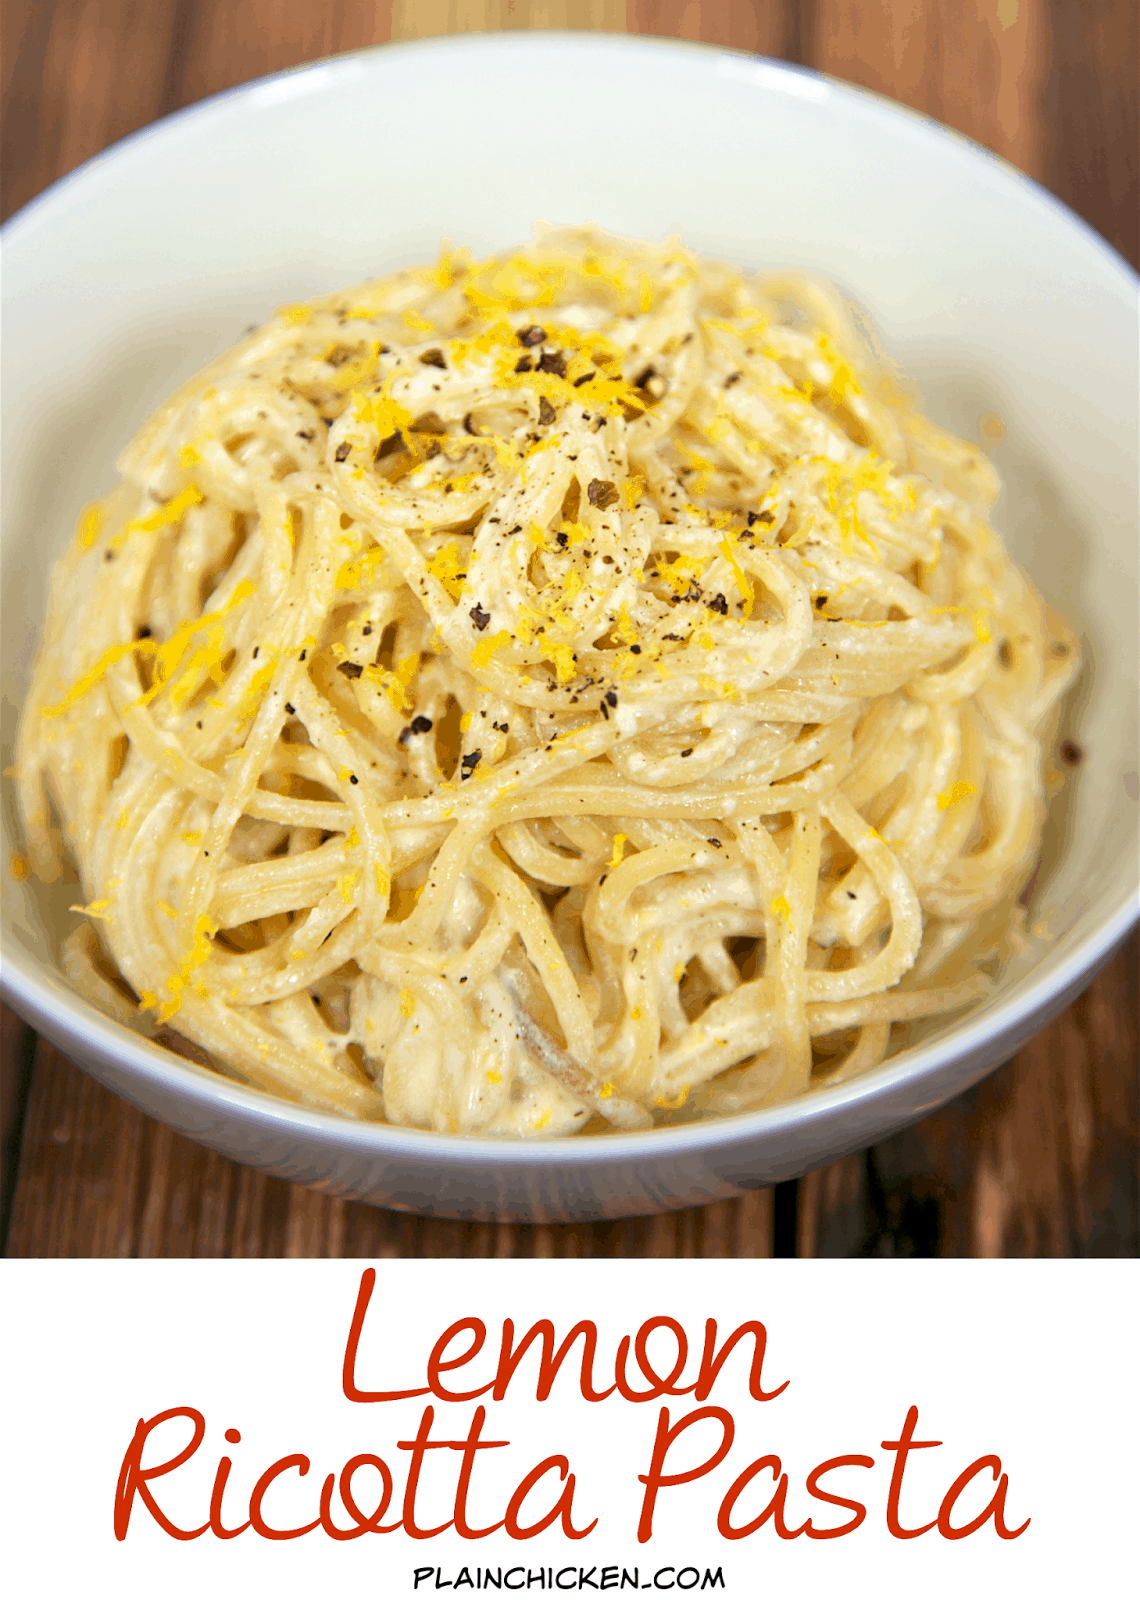 Lemon Ricotta Pasta - only 4 ingredients! Ready in 6 minutes. Super quick and easy side dish. Can add some rotisserie chicken and make it a complete meal. We love this delicious pasta!